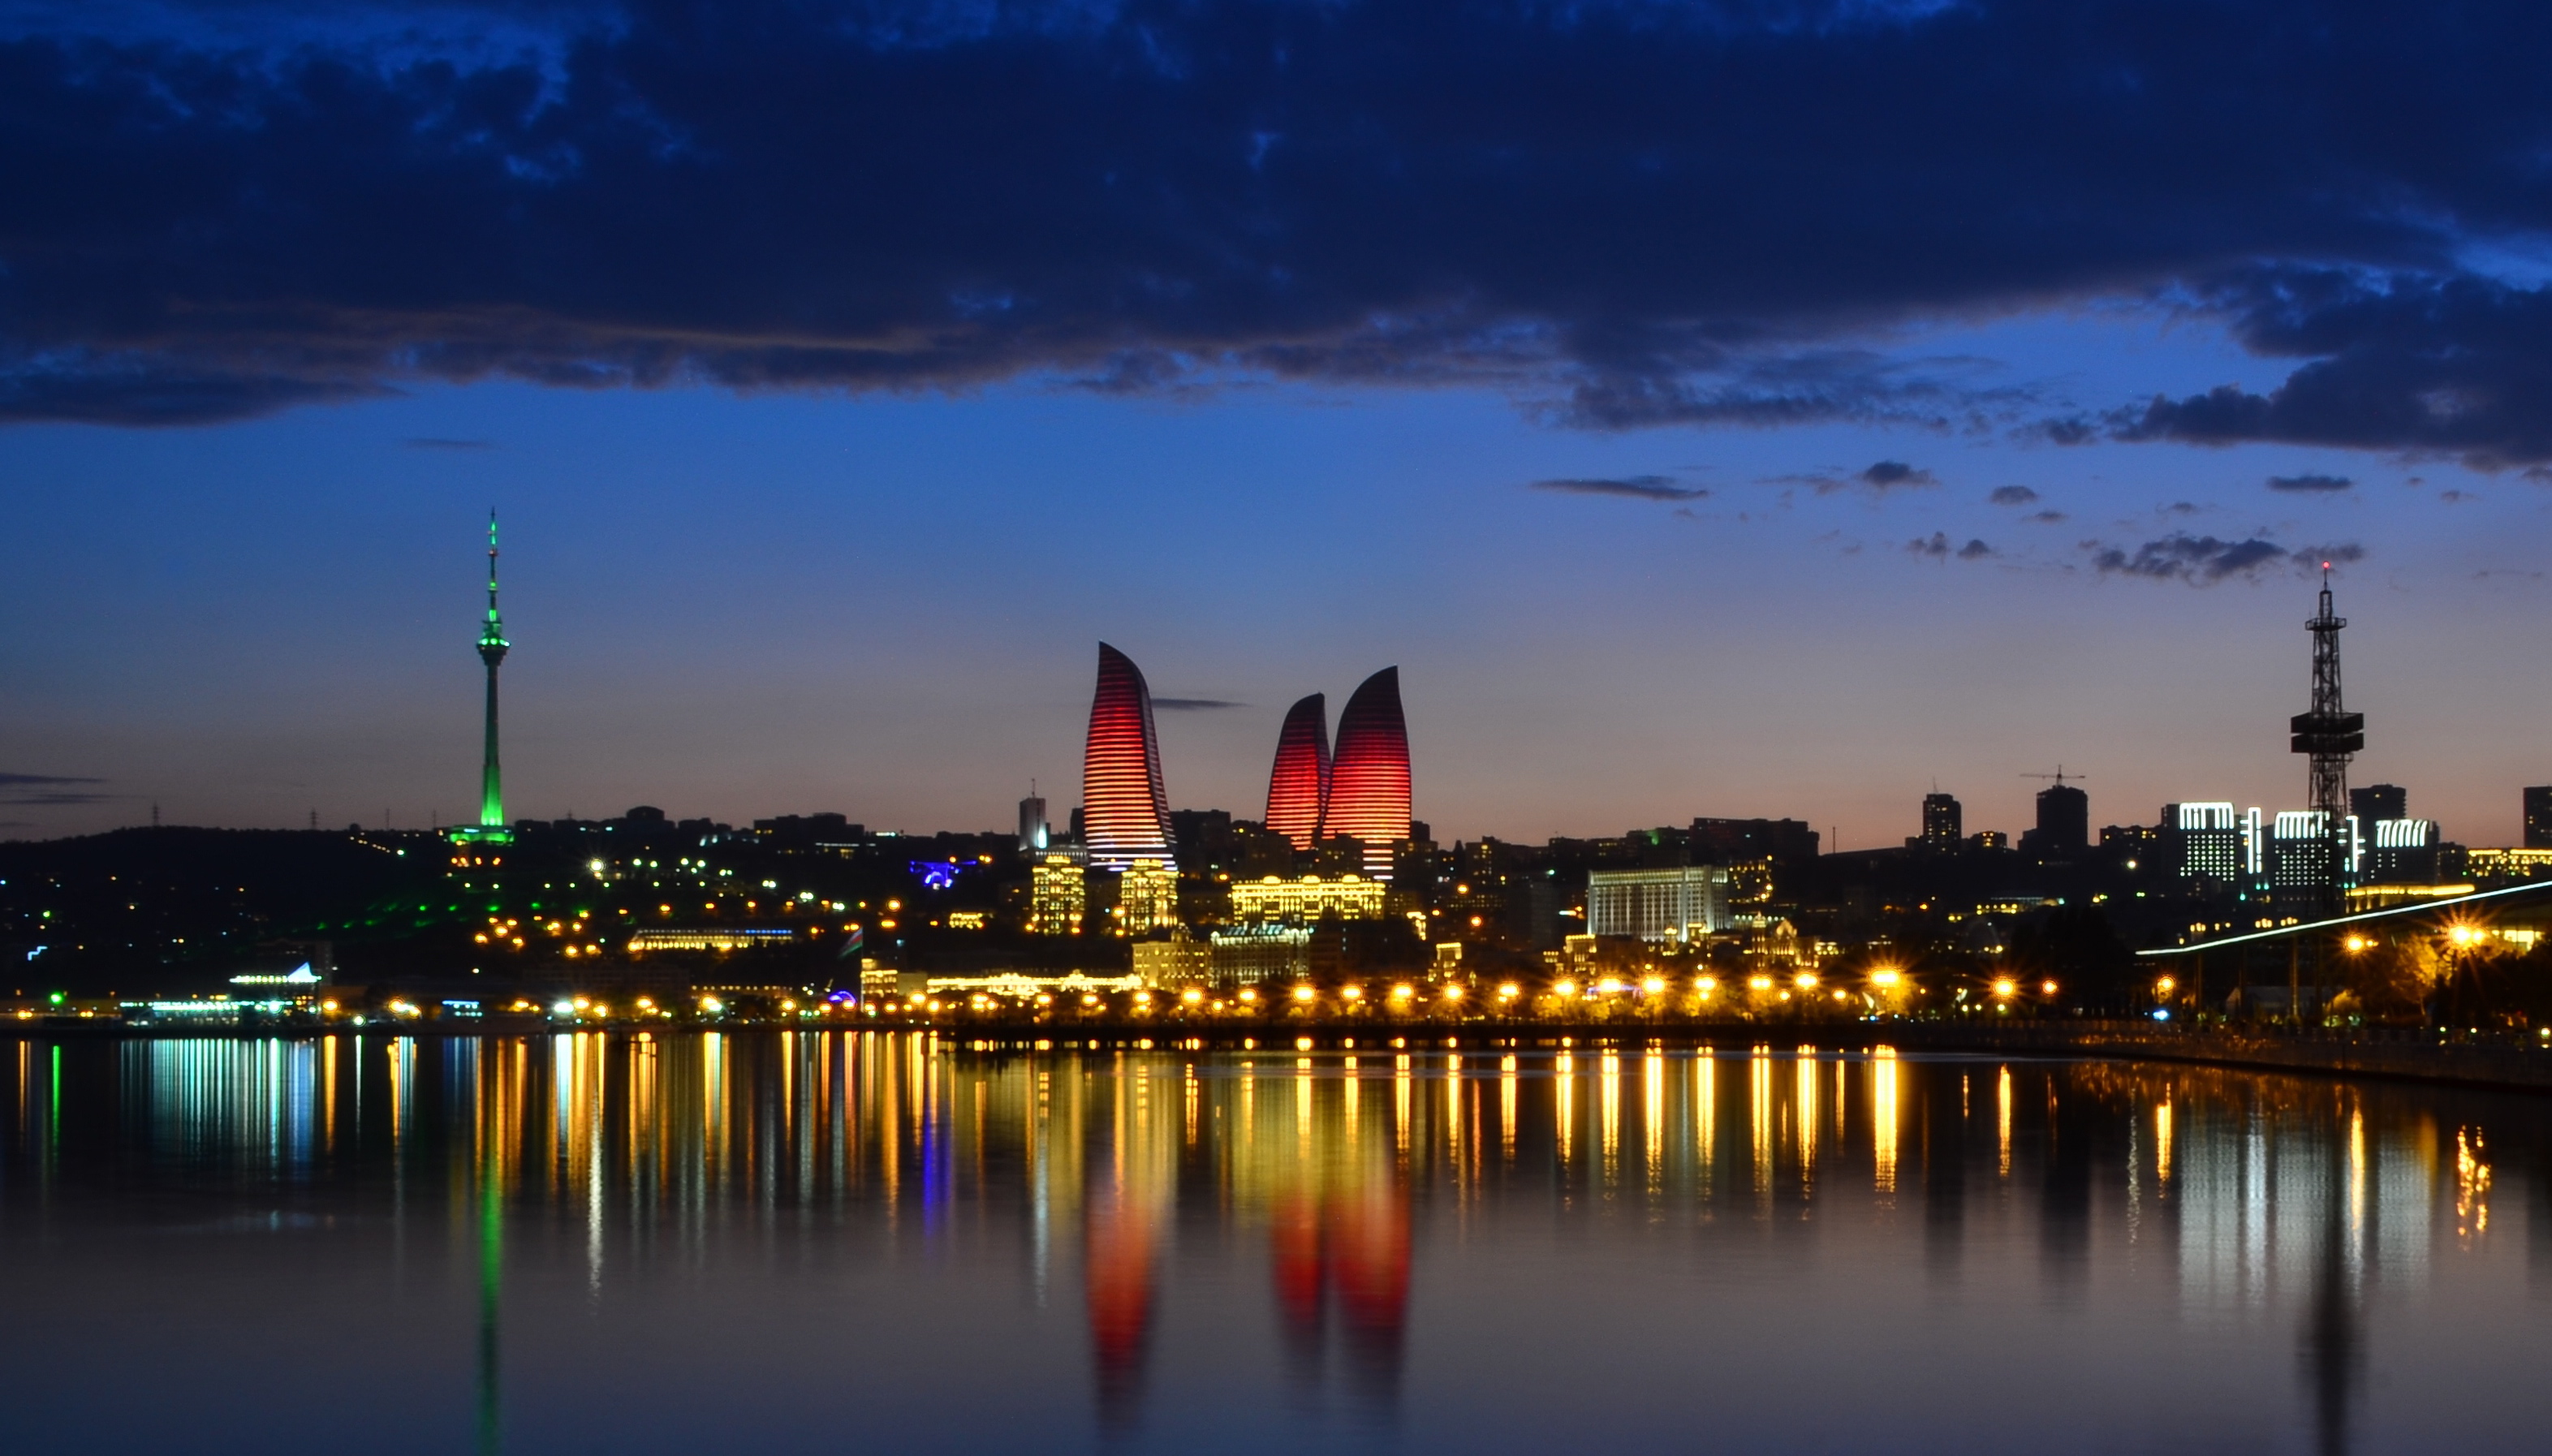 Baku alight: now-completed Flame Towers project (picture: Jabarov Samir)